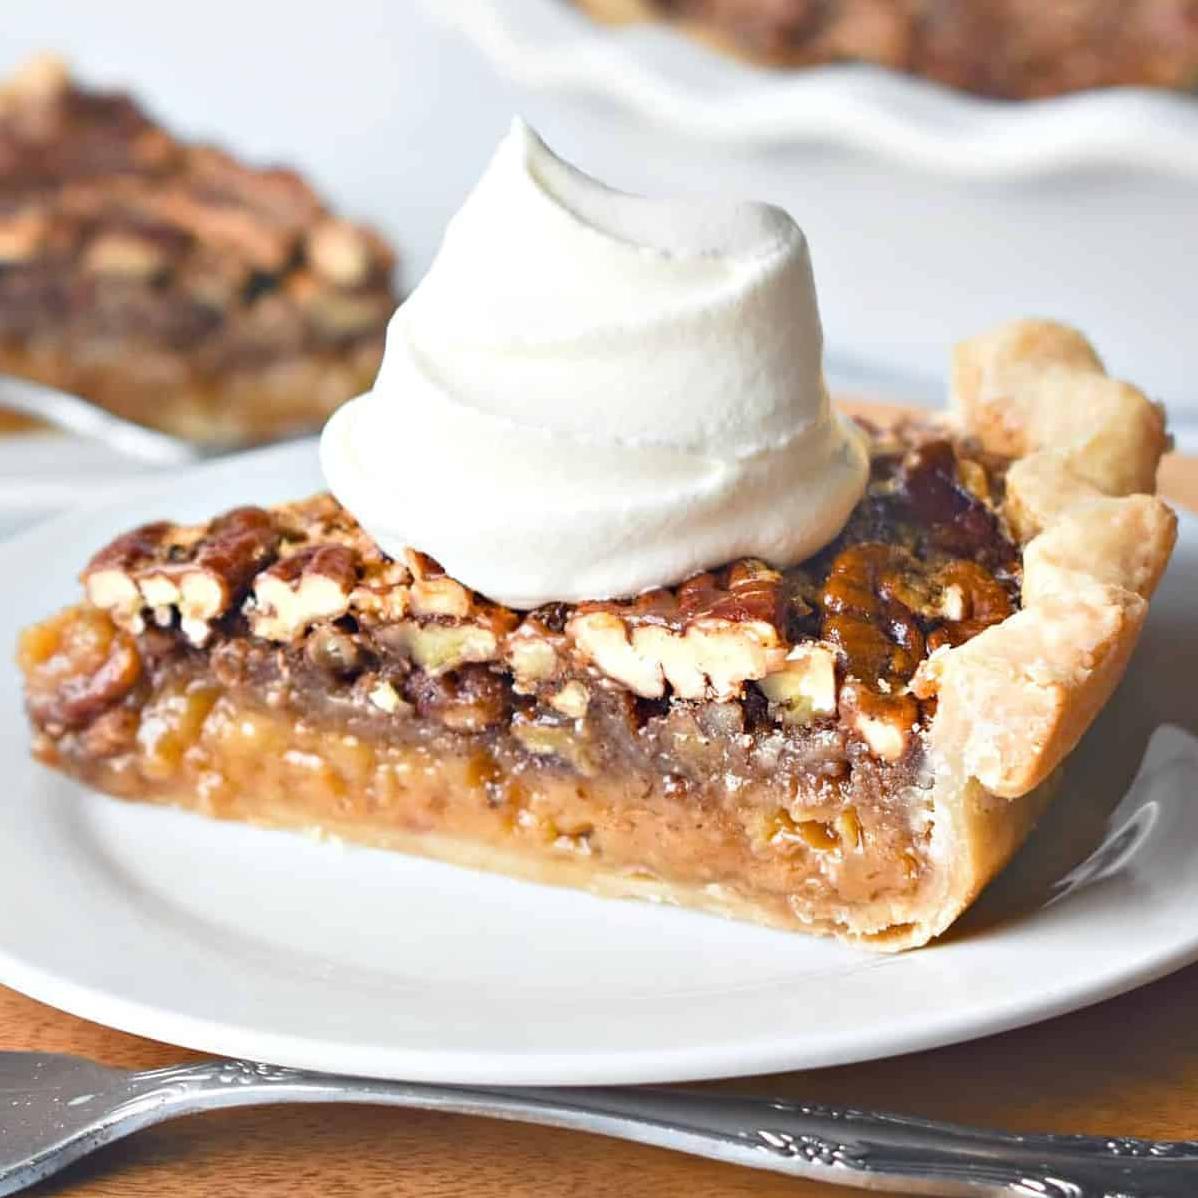  A Southern classic that never goes out of style: pecan pie!